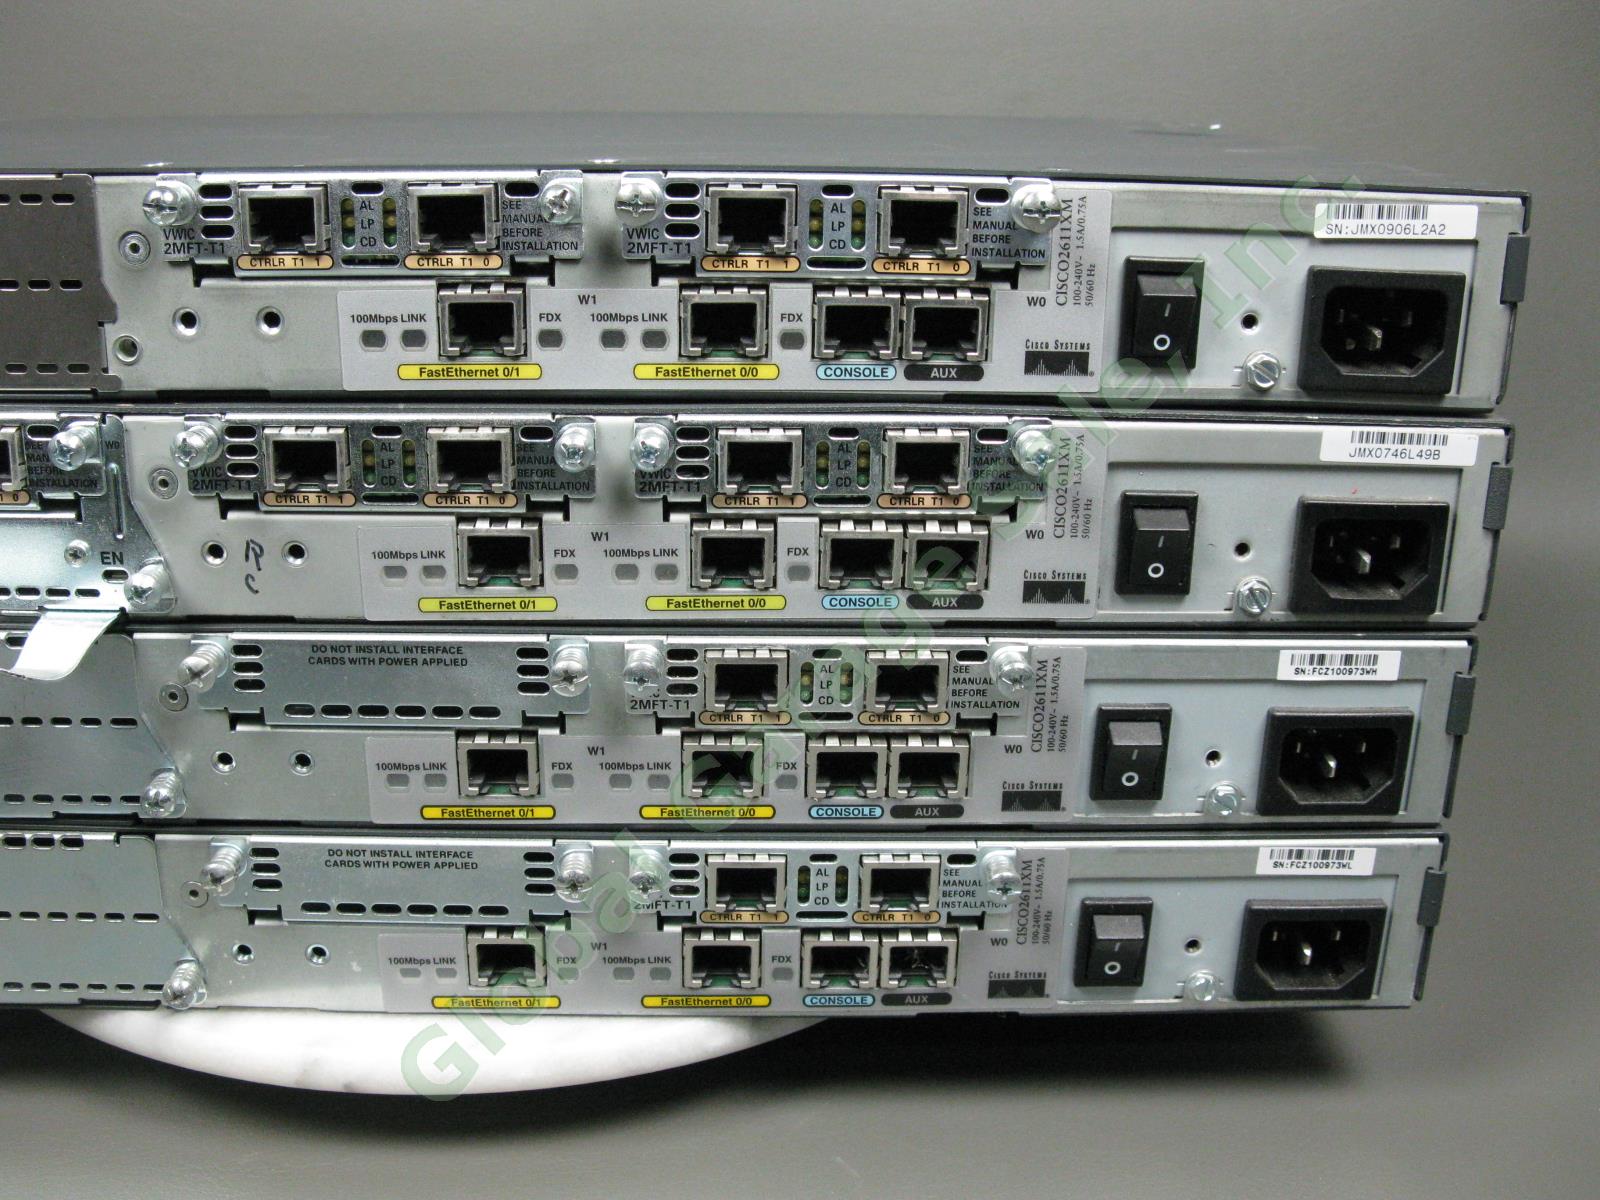 4 Cisco 2600 XM-Series Wired 4-Port Ethernet Router 10/100Mbps CISCO2611XM NR! 6